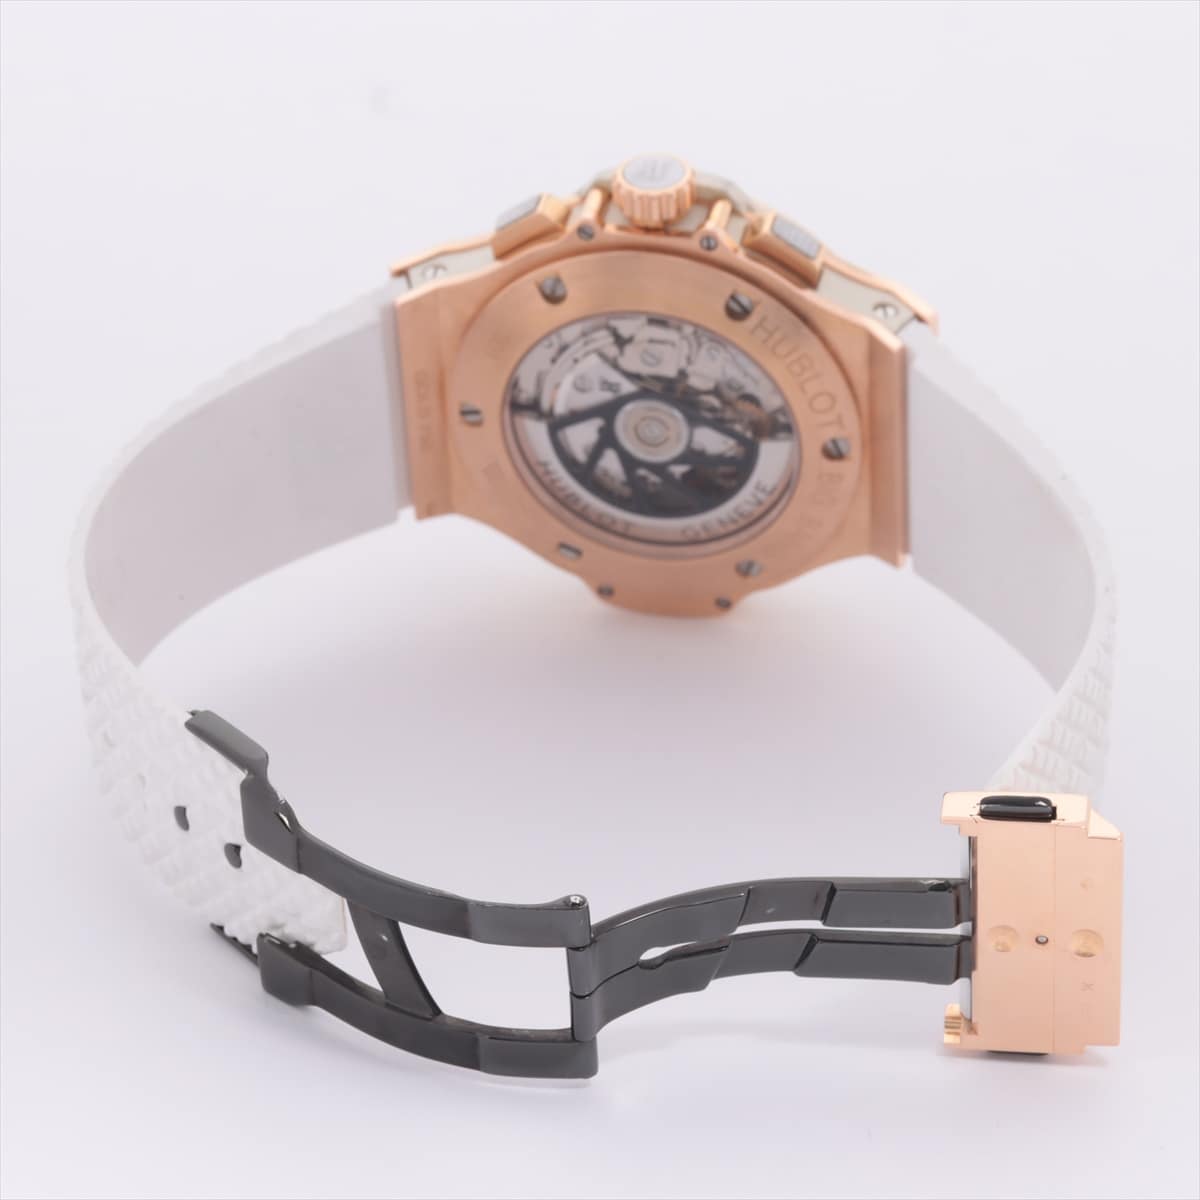 [Chrono] Hublot Big bang 301.PE.230.RW.114 750 x TI x rubber AT White-Face Watch strap with a scent of perfume